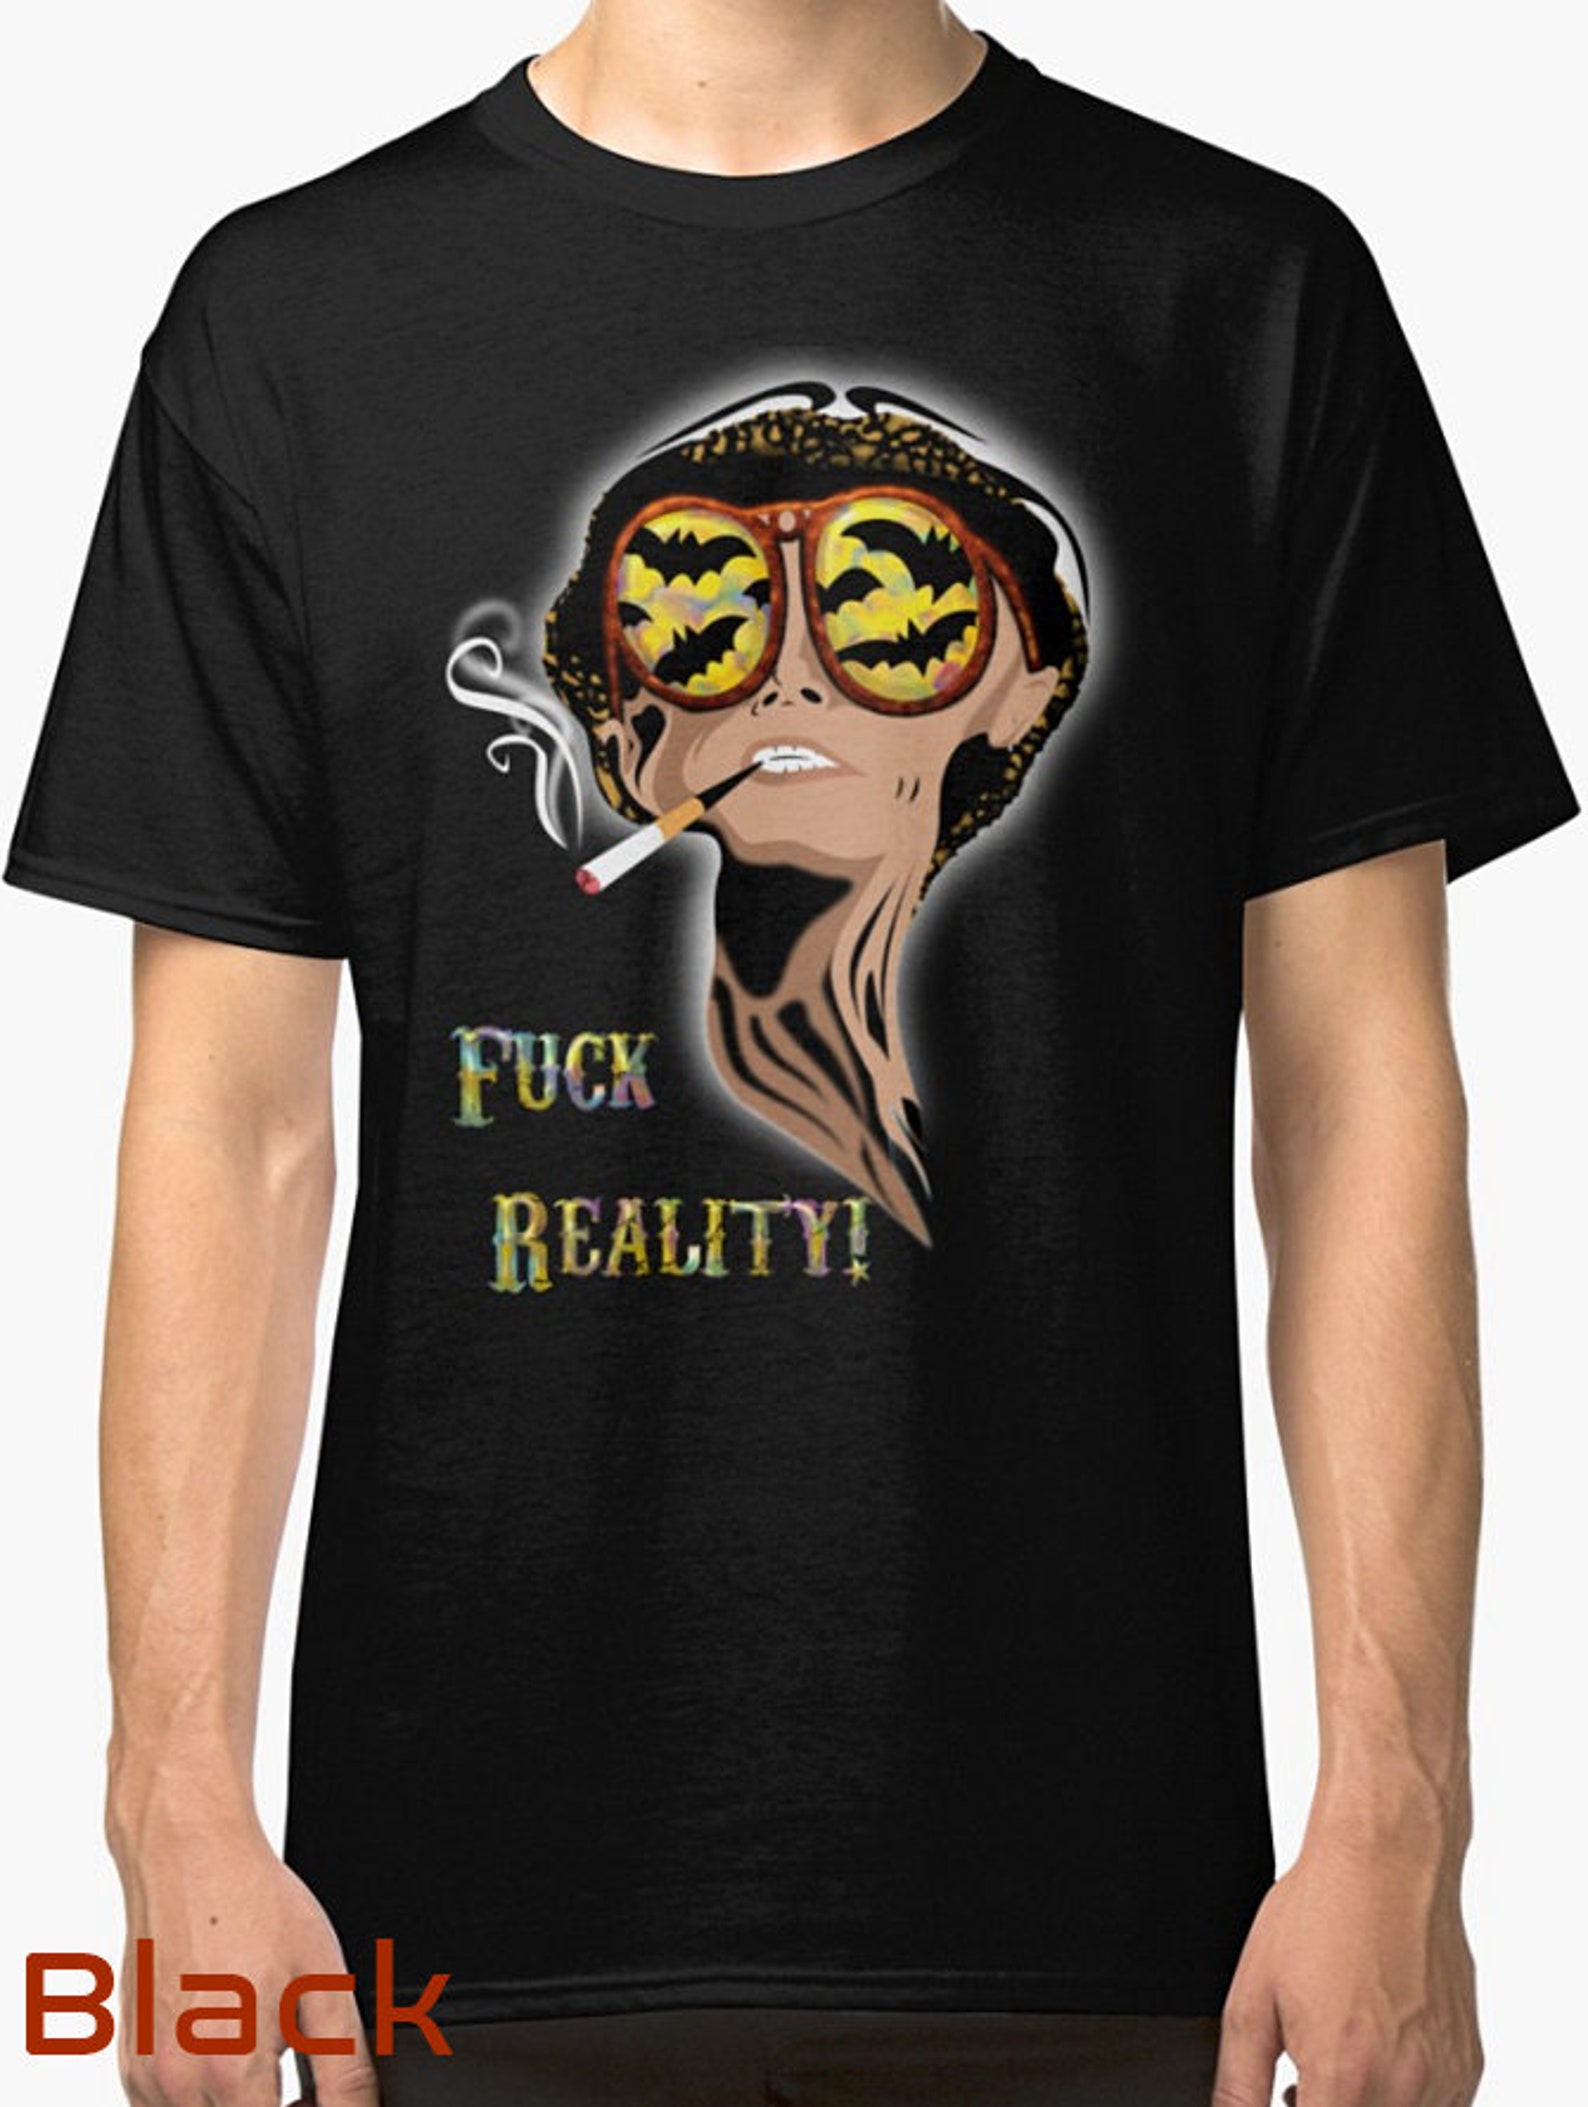 Fear and loathing in Las Vegas trippy Classic T-Shirt UNISEX | Etsy